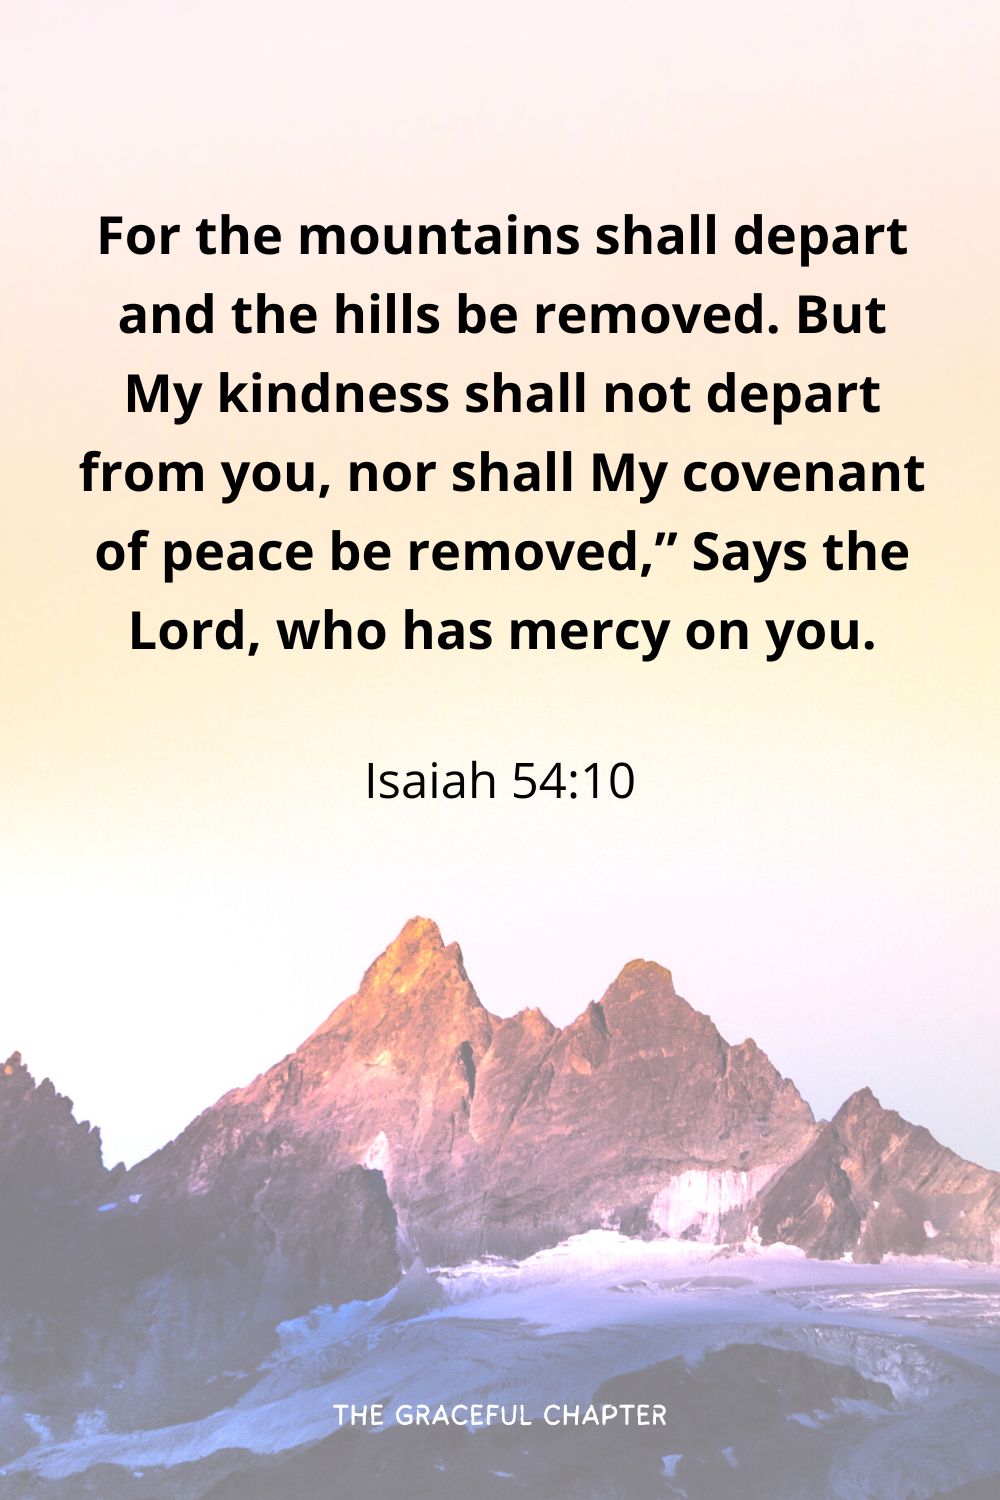 For the mountains shall depart and the hills be removed. But My kindness shall not depart from you, nor shall My covenant of peace be removed,” Says the Lord, who has mercy on you.